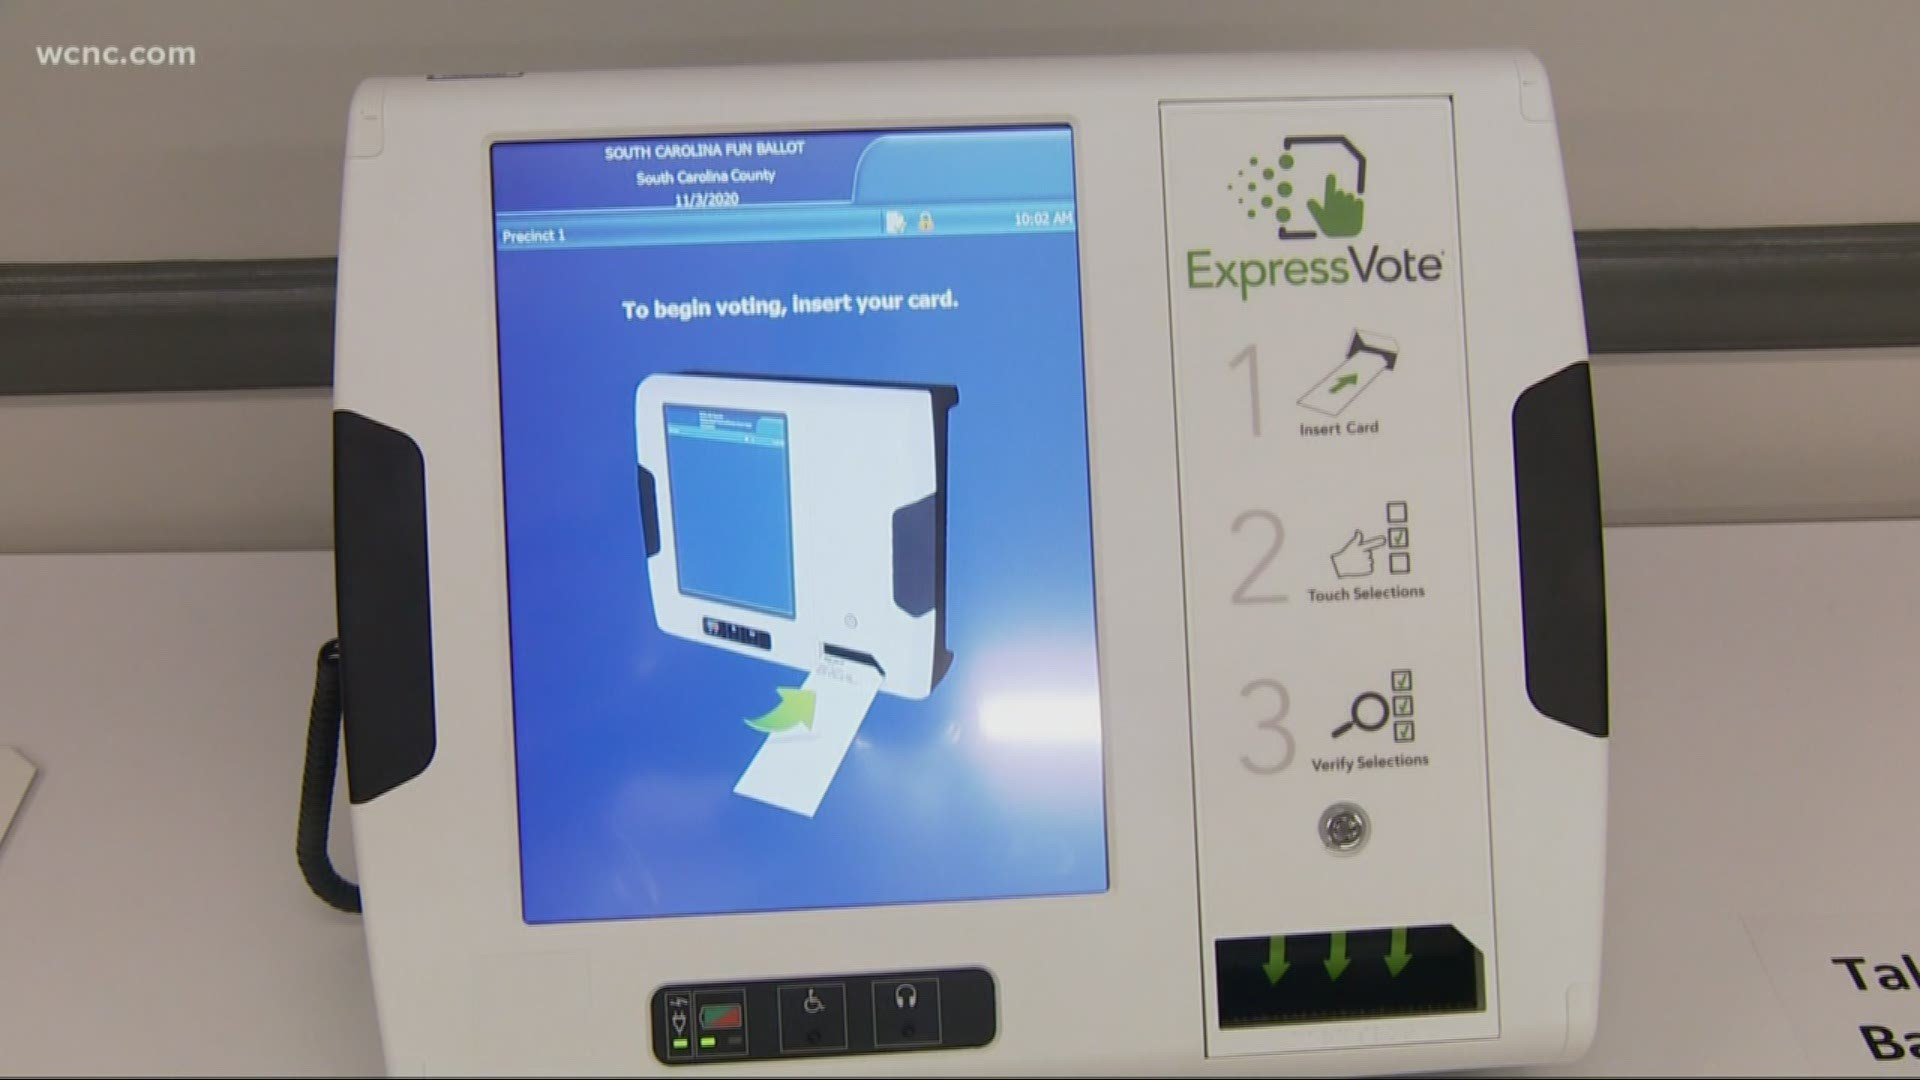 Alan Helms, Deputy Director for SC Voter Registration said the machines are easy to use and safe from computer hackers trying to interfere with the 2020 Presidential